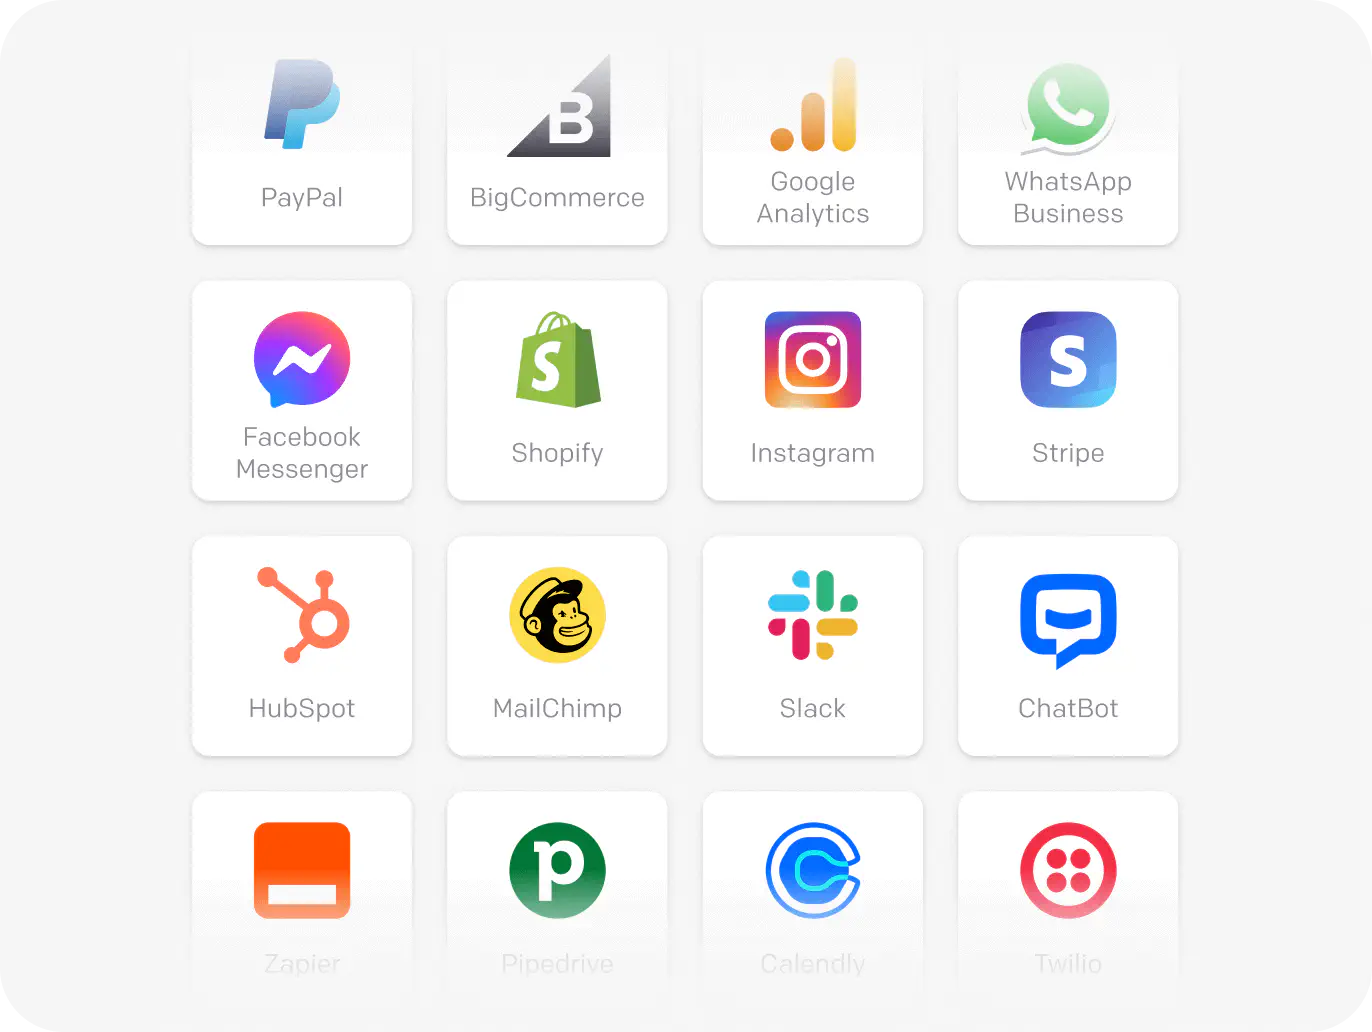 An image showing apps available as integrations in the live chat marketplace